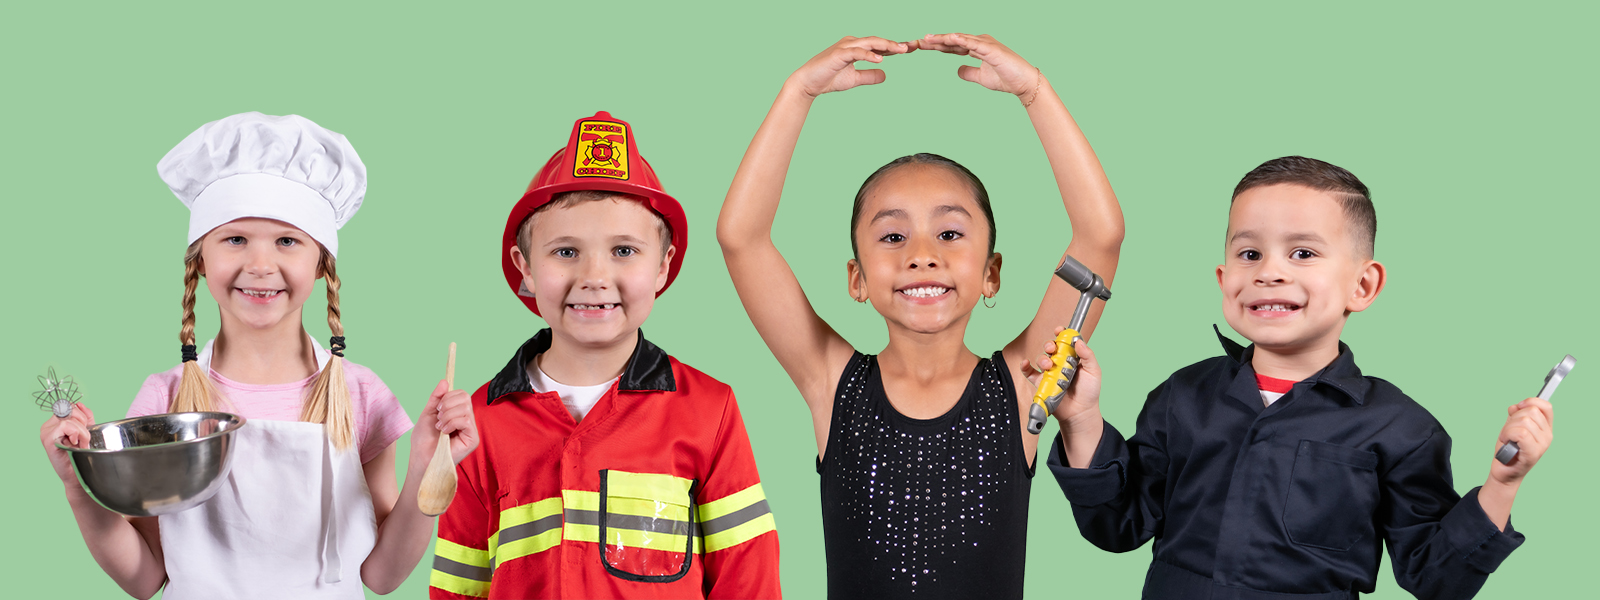 Kindergarten Students dressed as Careers, including chef, dancer, firefighter, and mechanic.